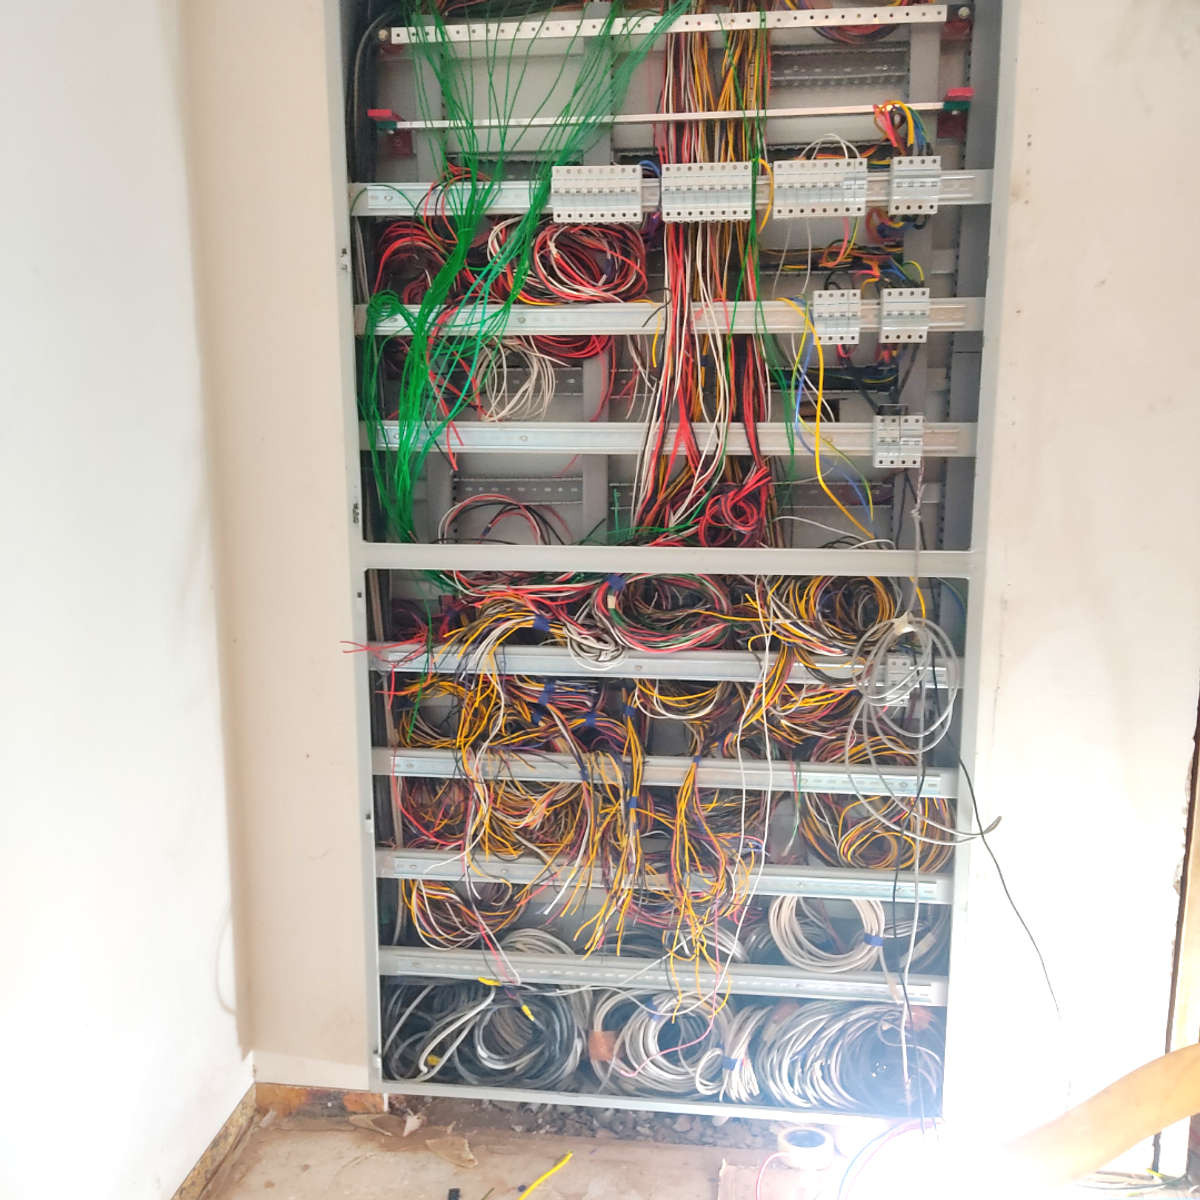 Home automation electrical work